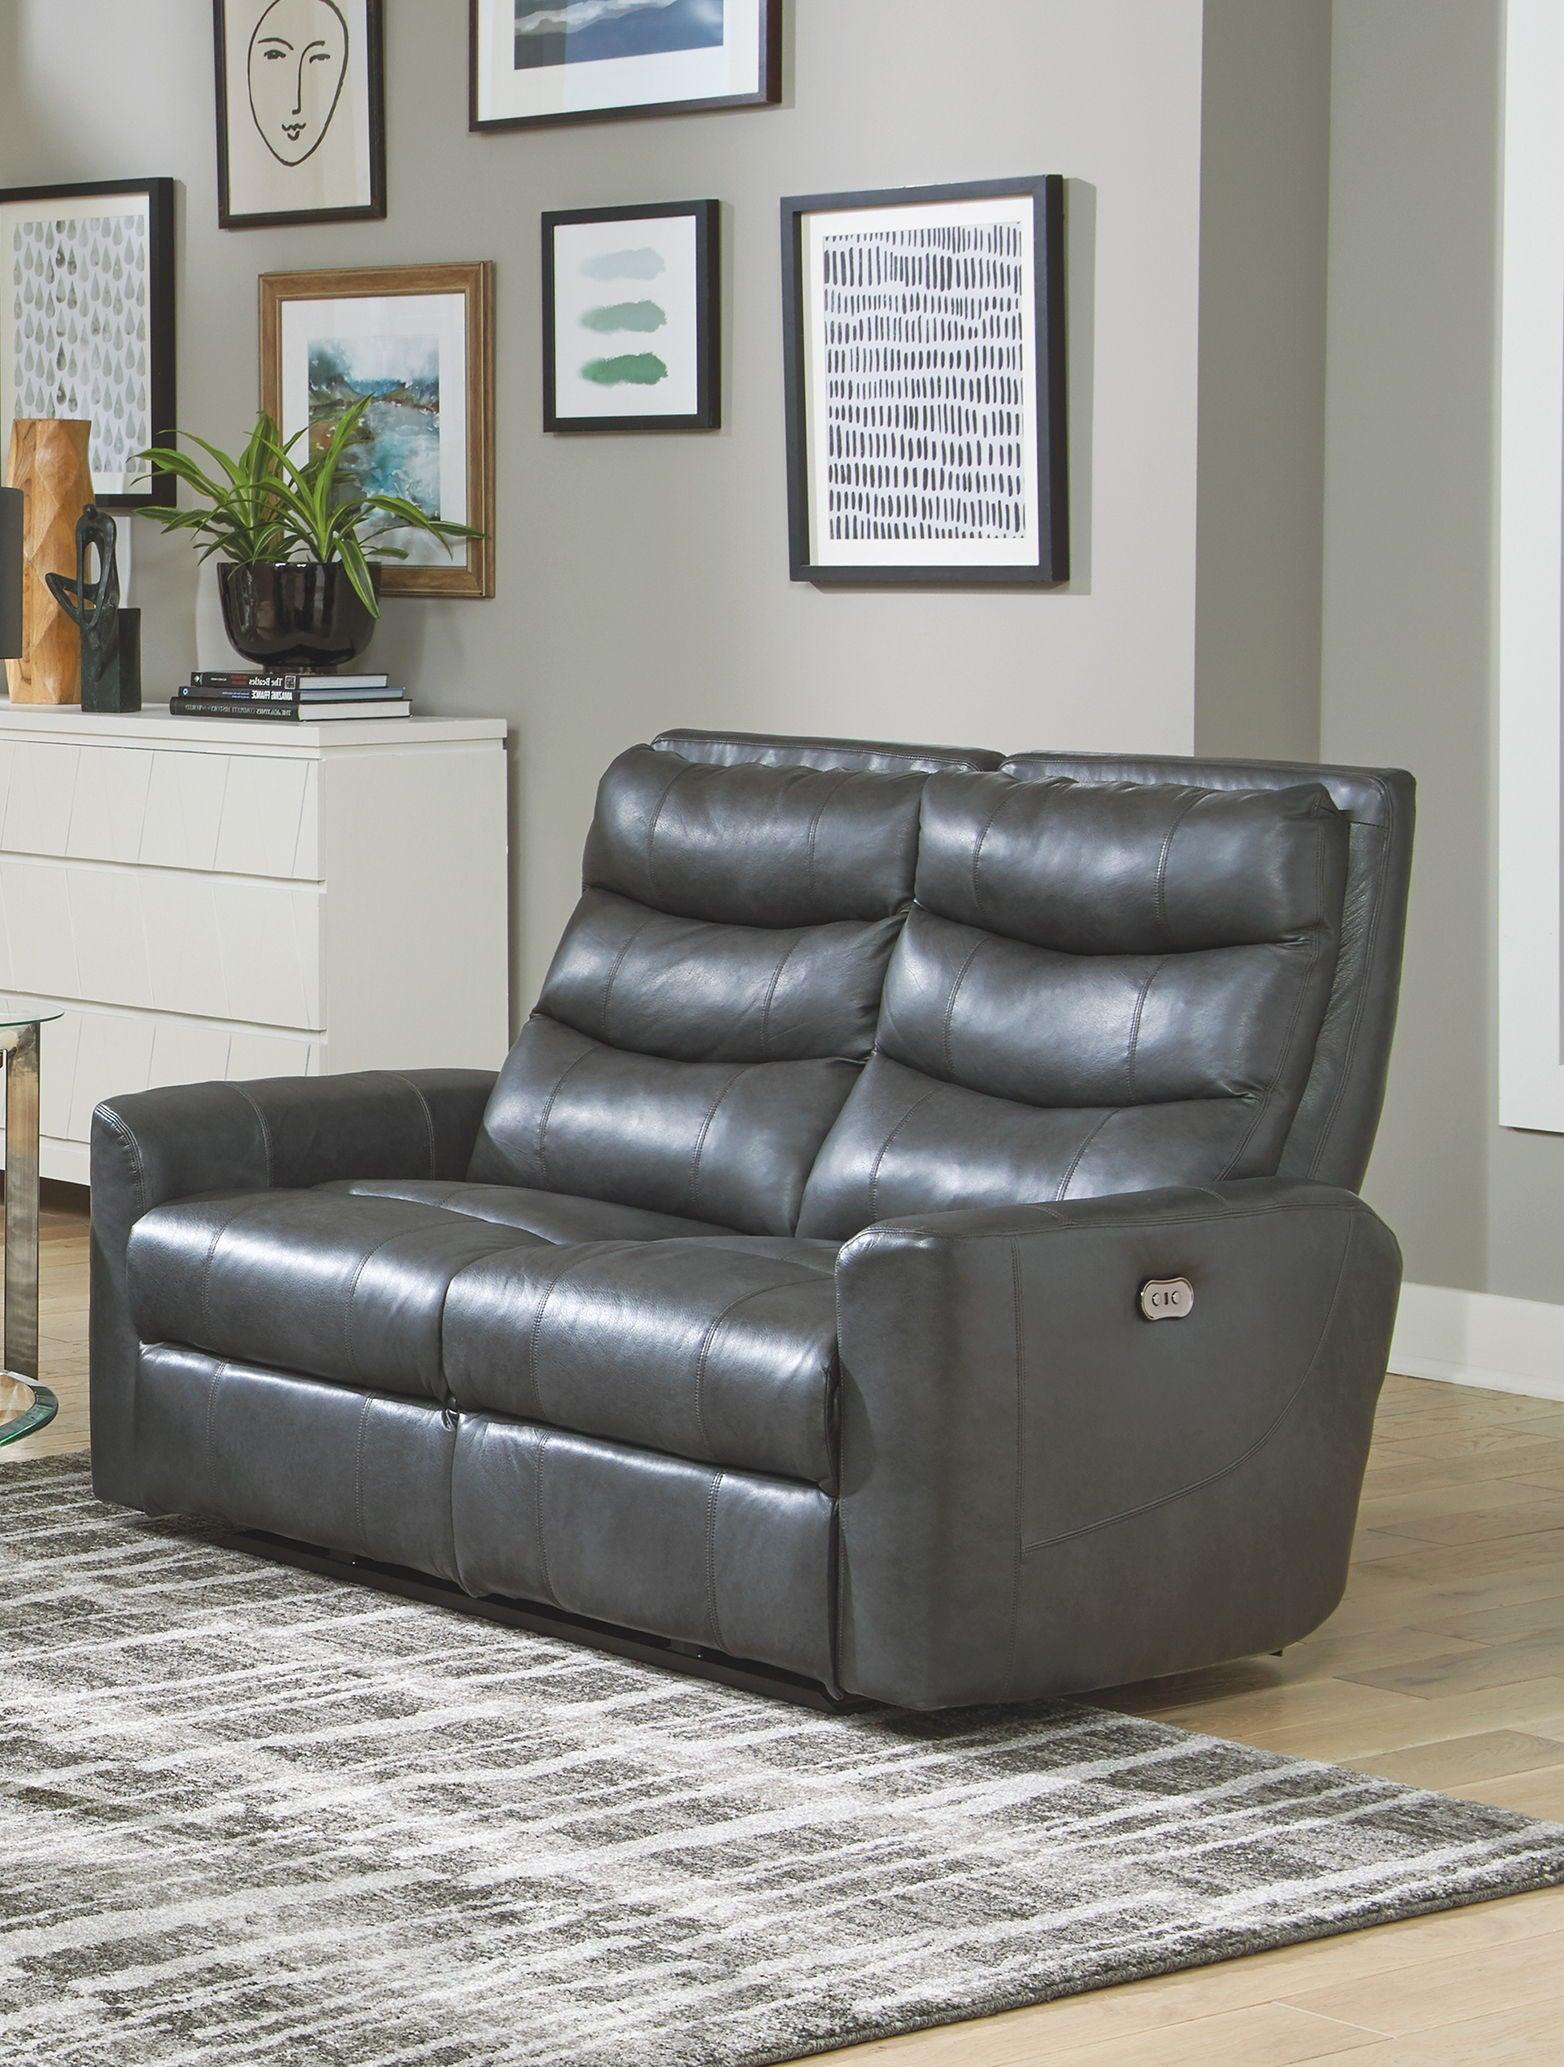 Catnapper - Bosa - Power Reclining Loveseat - Charcoal - Leather - 5th Avenue Furniture